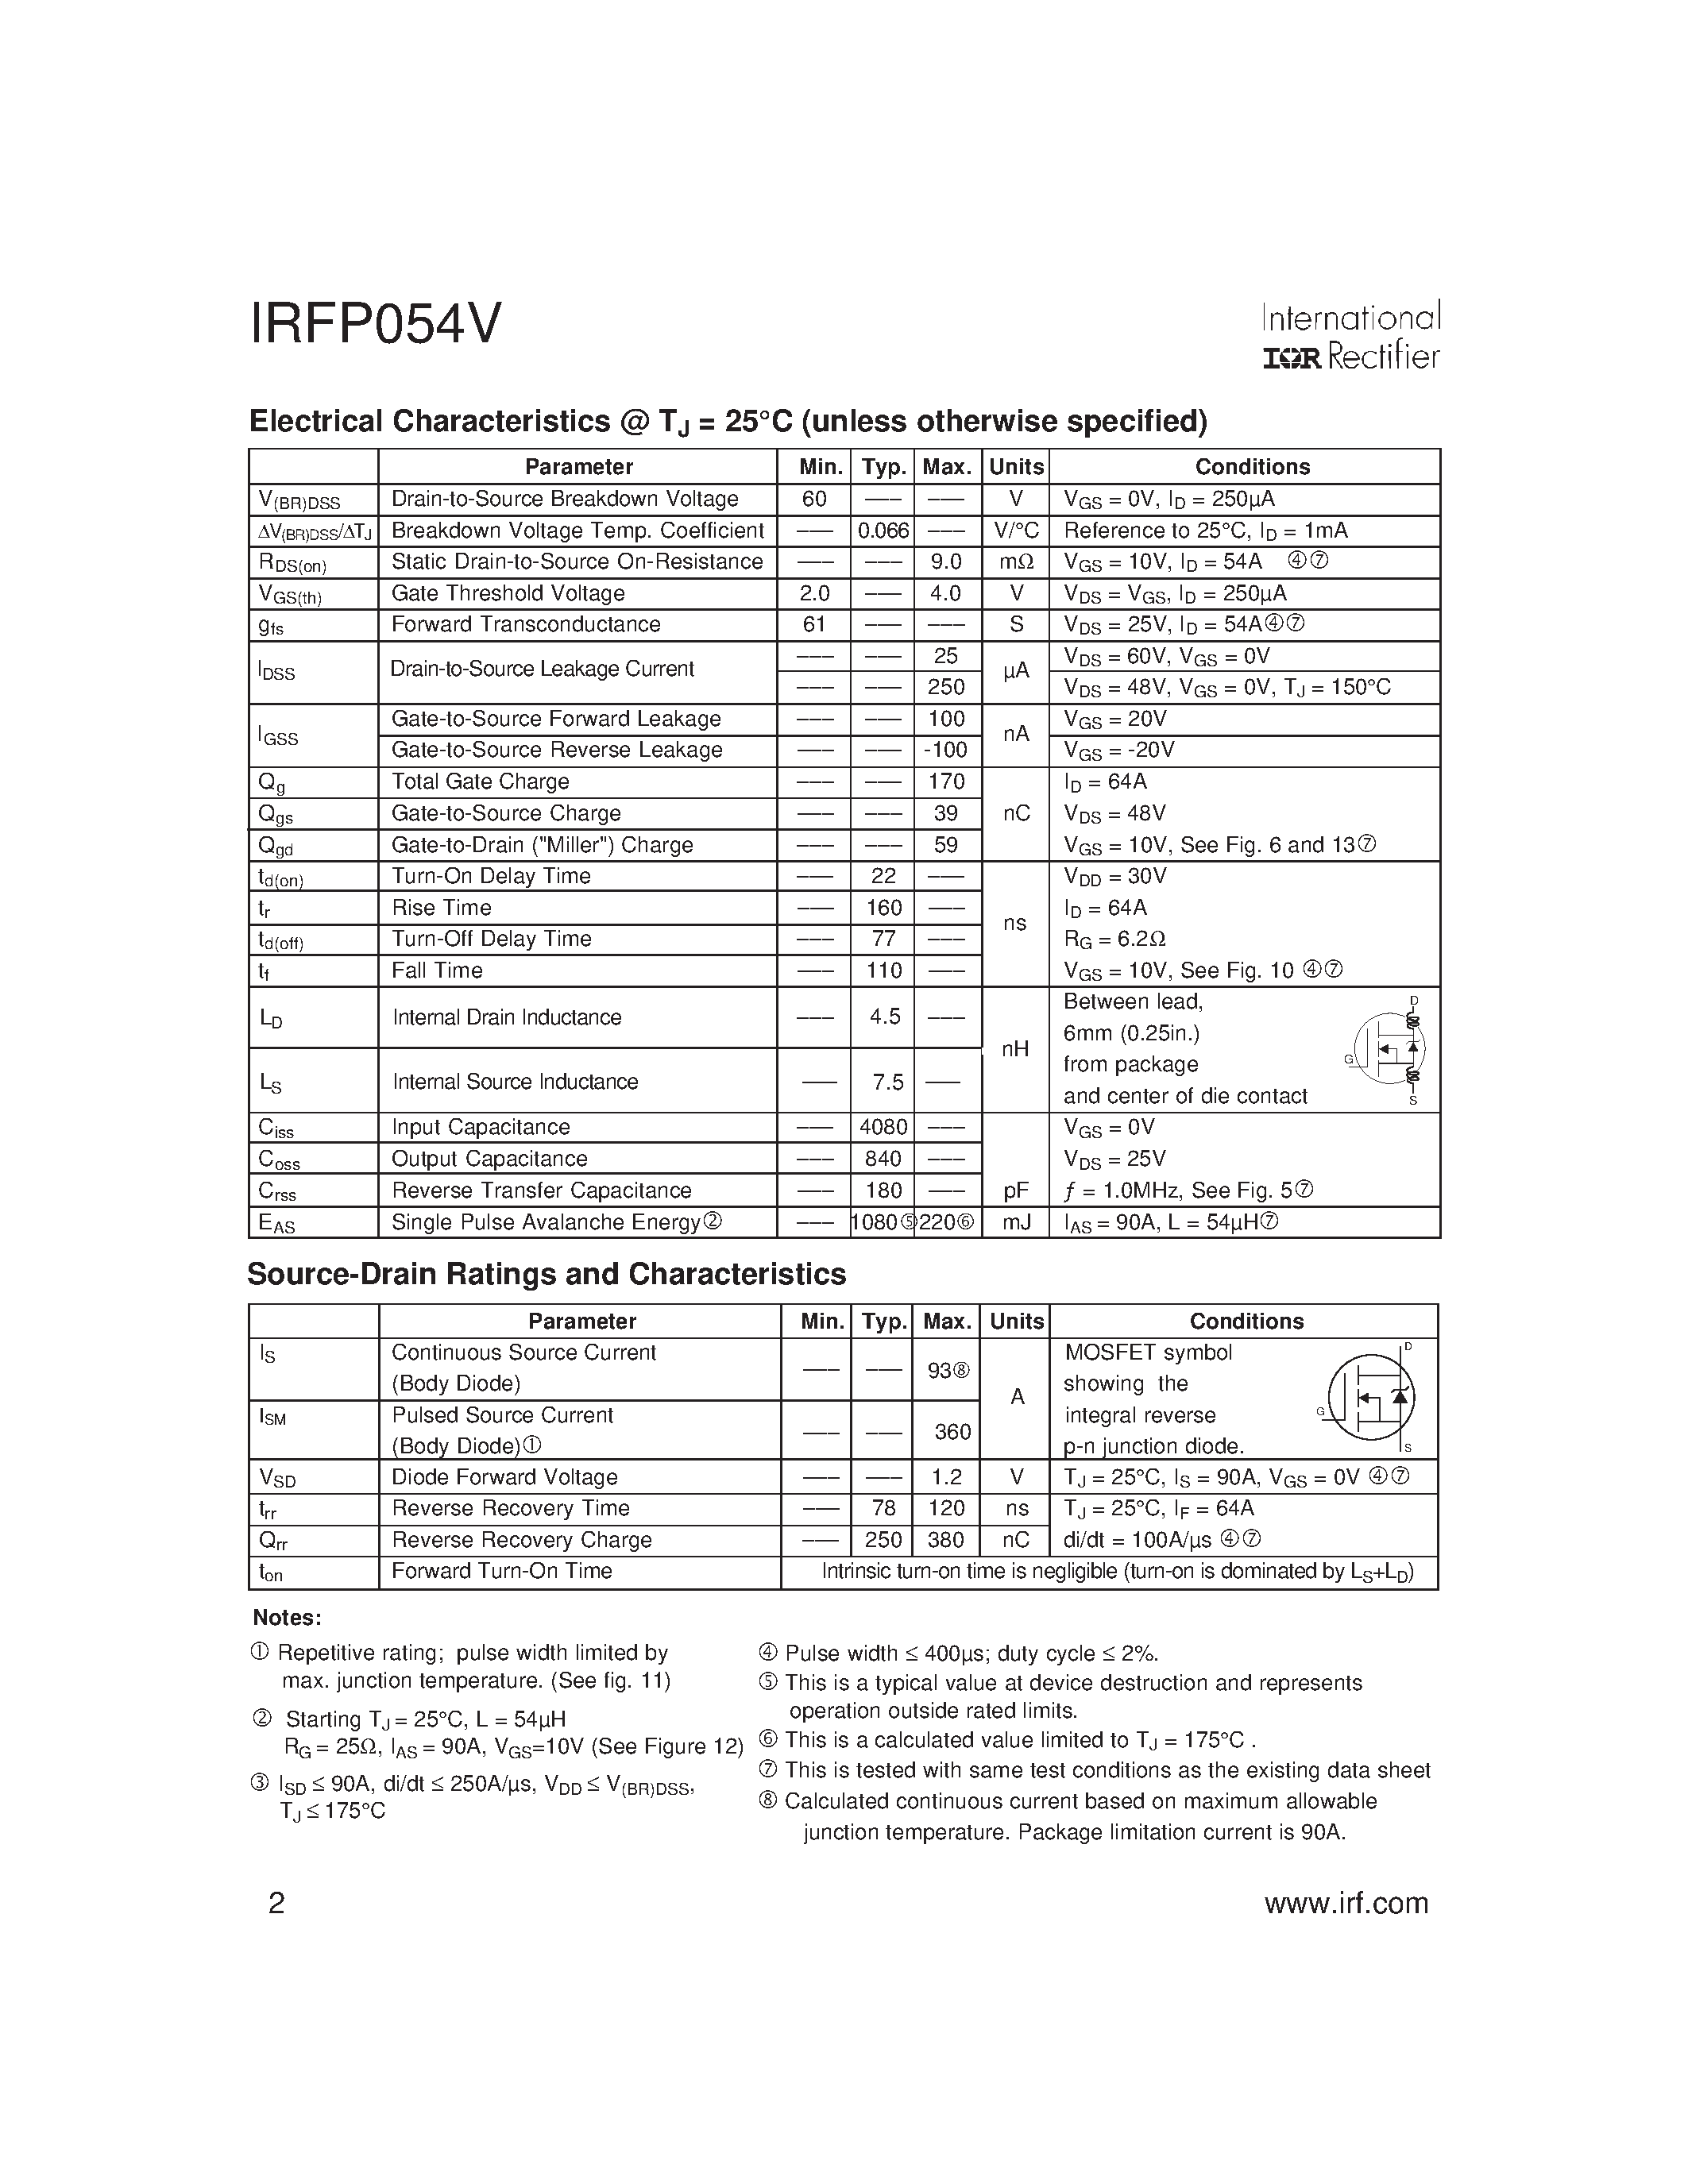 Datasheet IRFP054V - Power MOSFET page 2